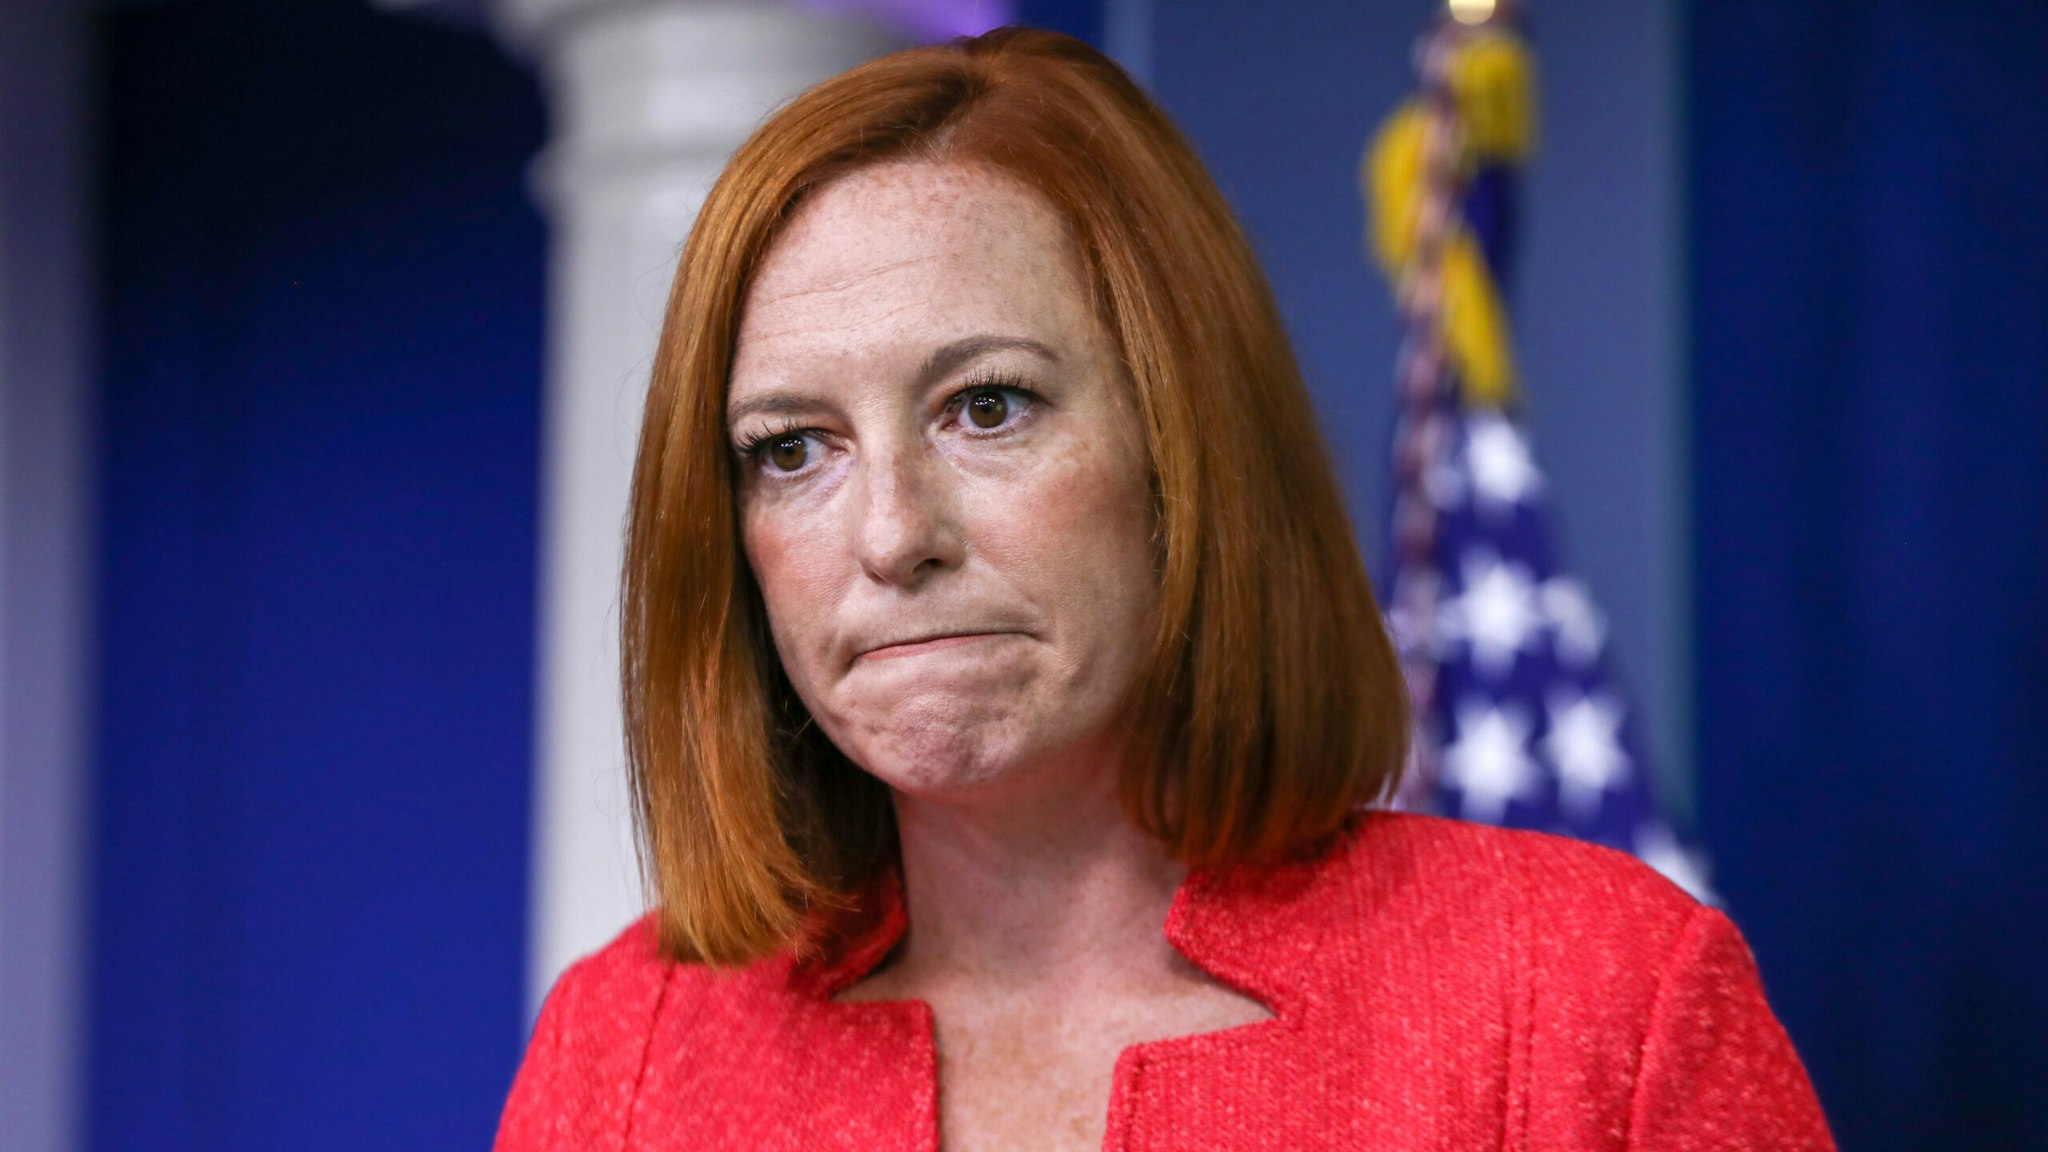 WASHINGTON, DC - AUGUST 23: White House Press Secretary Jen Psaki holds the daily press briefing at the White House on August 23, 2021 in Washington, DC, United States. Psaki and National Security Advisor Jake Sullivan took questions about the situation in Afghanistan.